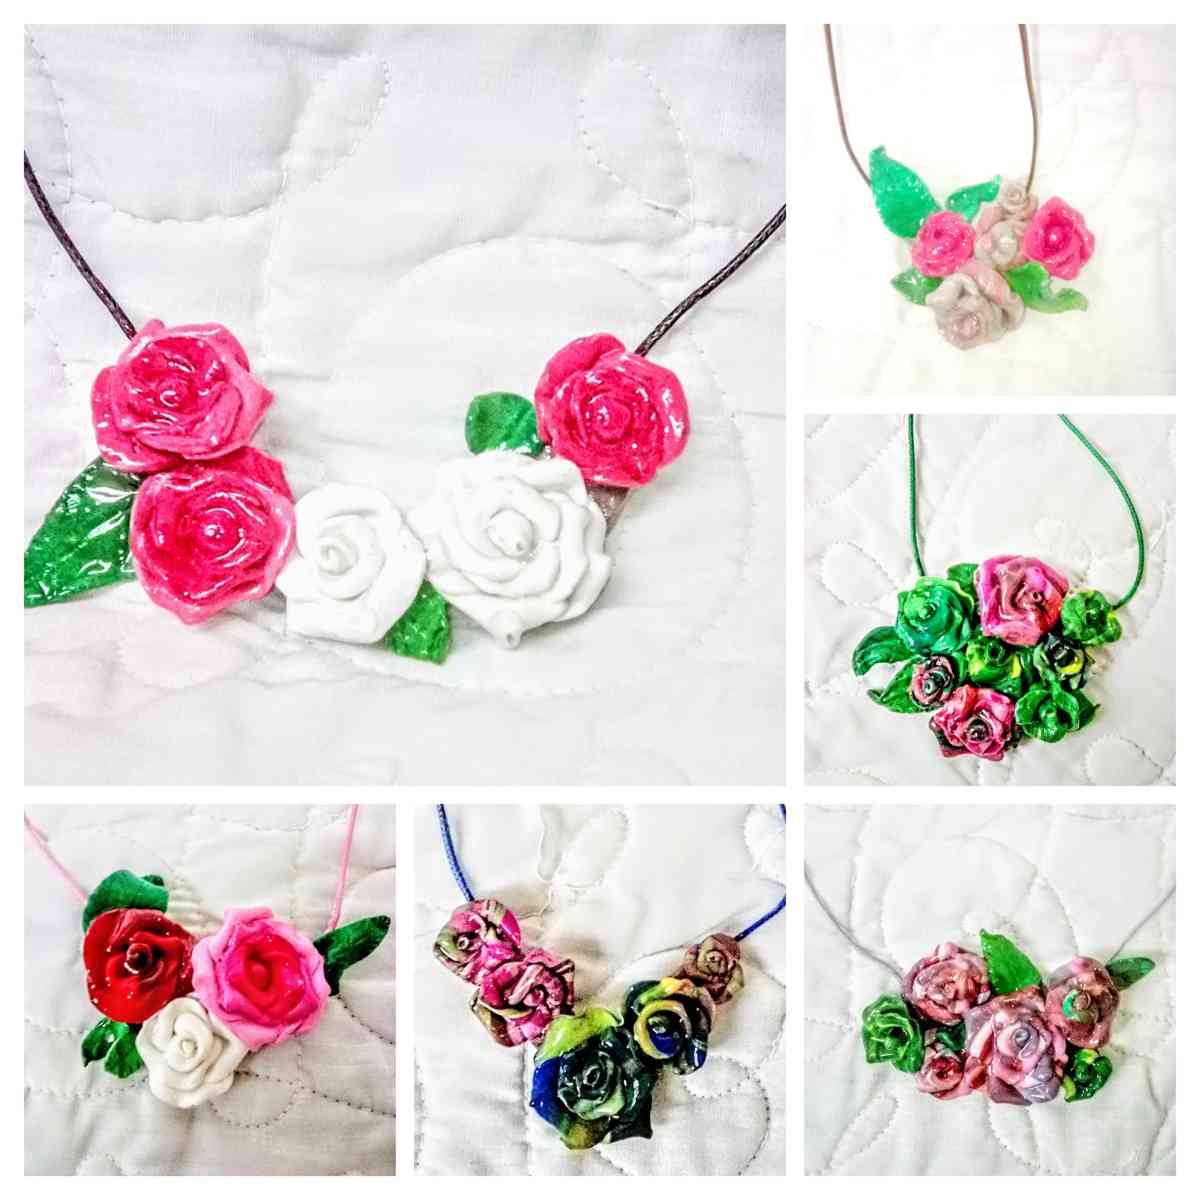 Handcrafted One of a kind Original Rose Statement Necklaces